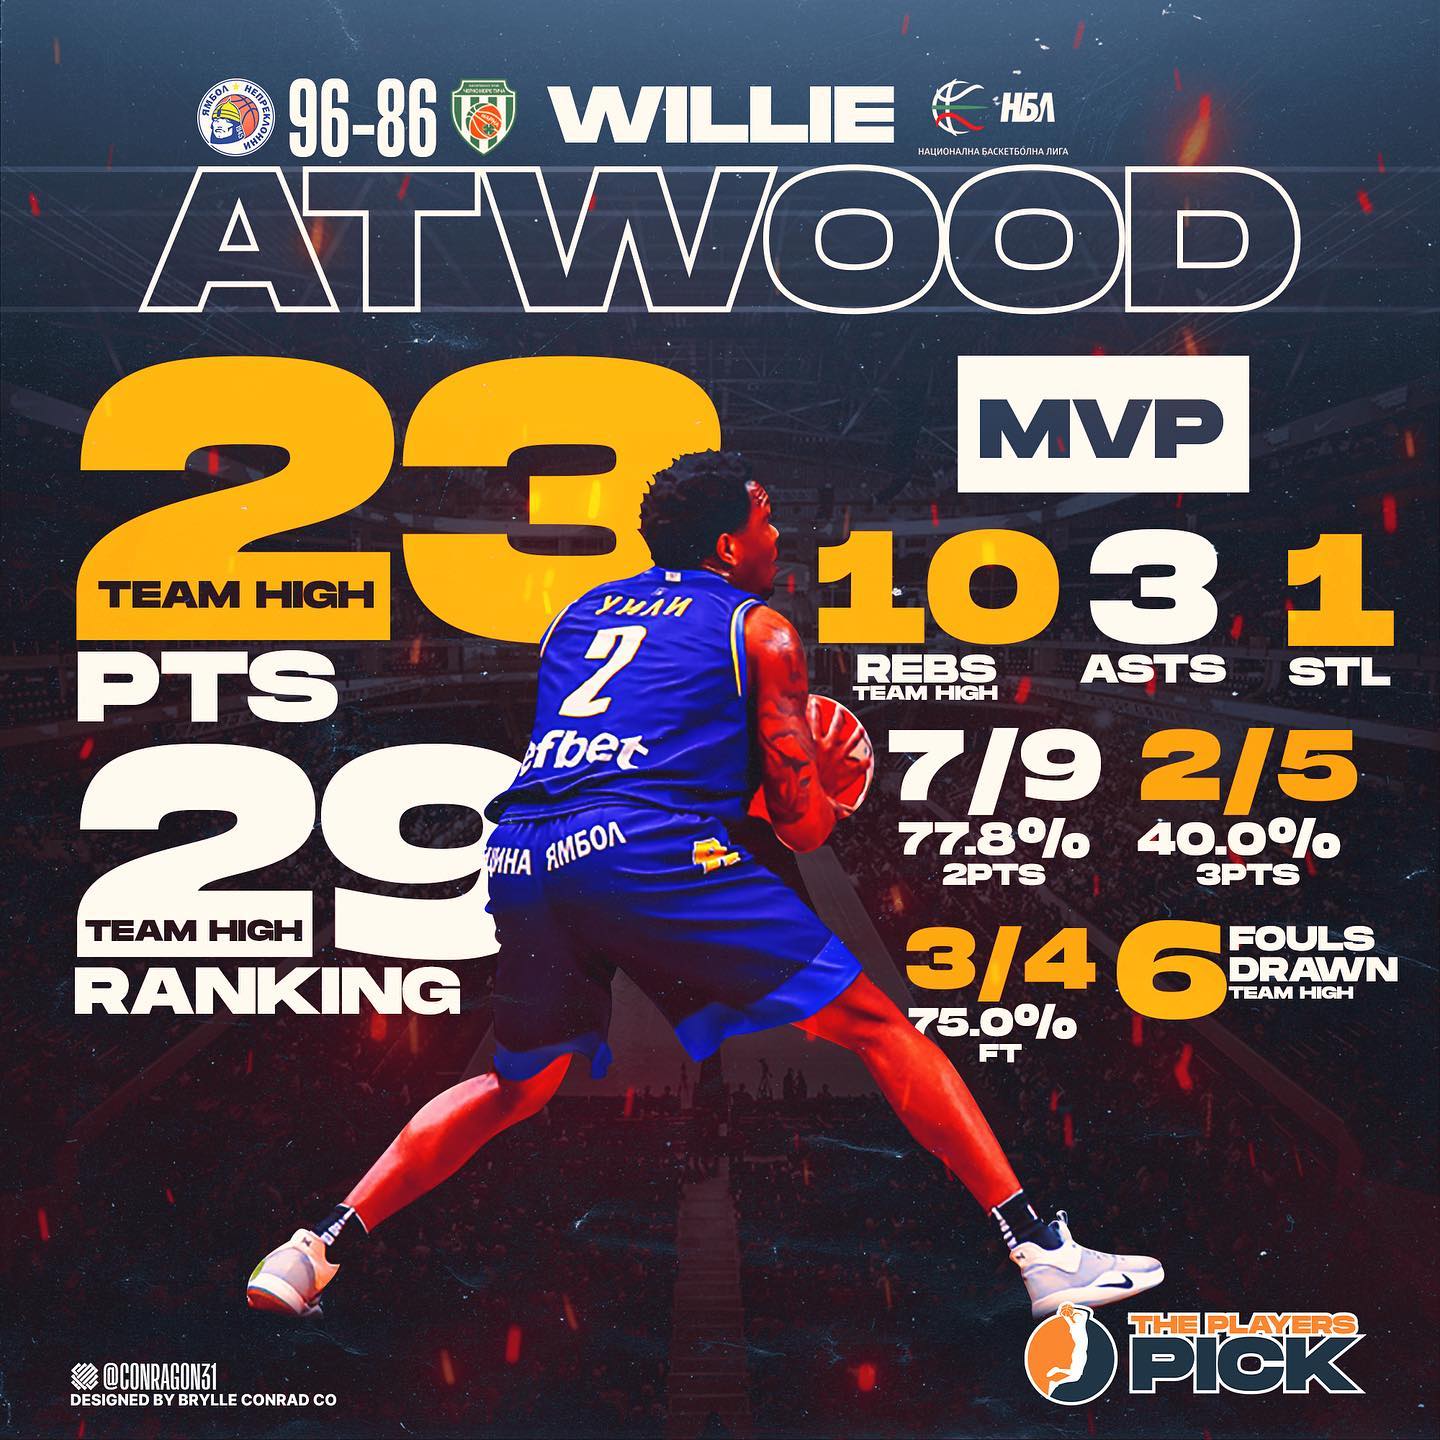 MVP Willie Atwood led Yambol to another W with 23 points & 10 rebounds!